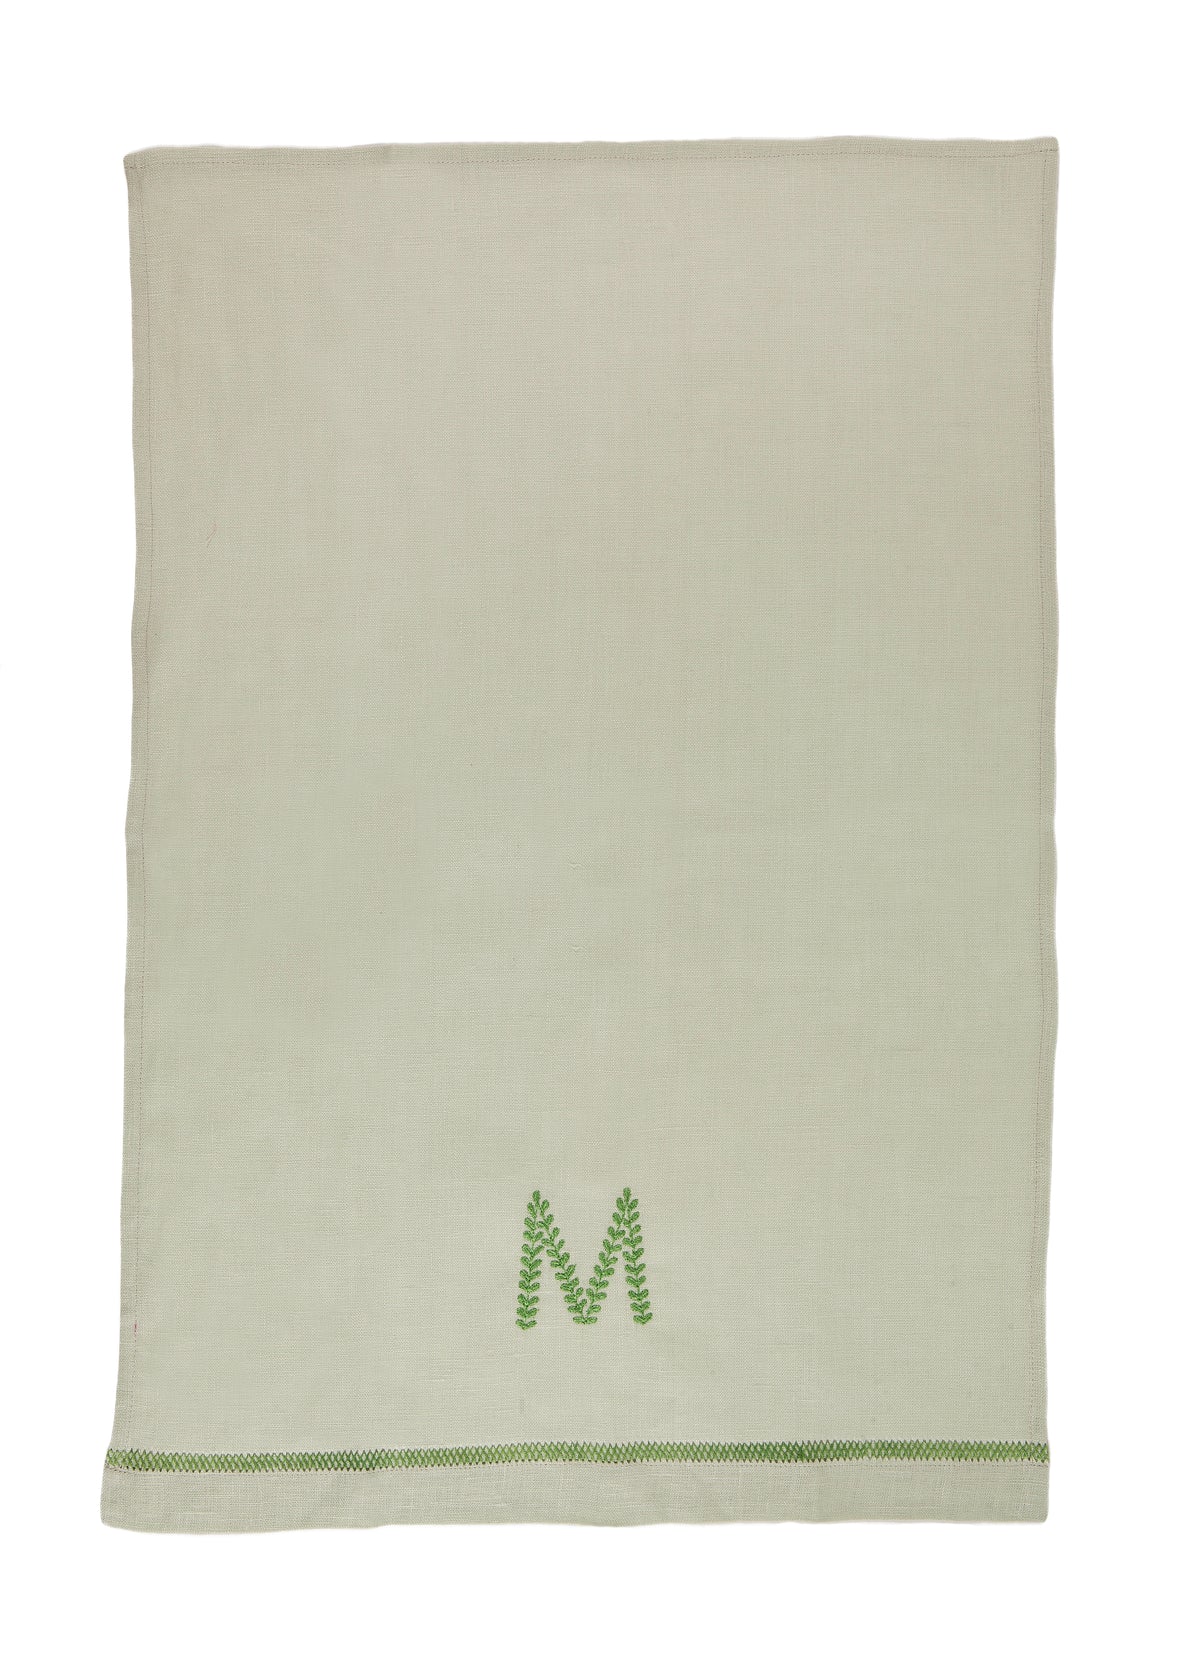 Mint Guest Towel with Greenery Monogram